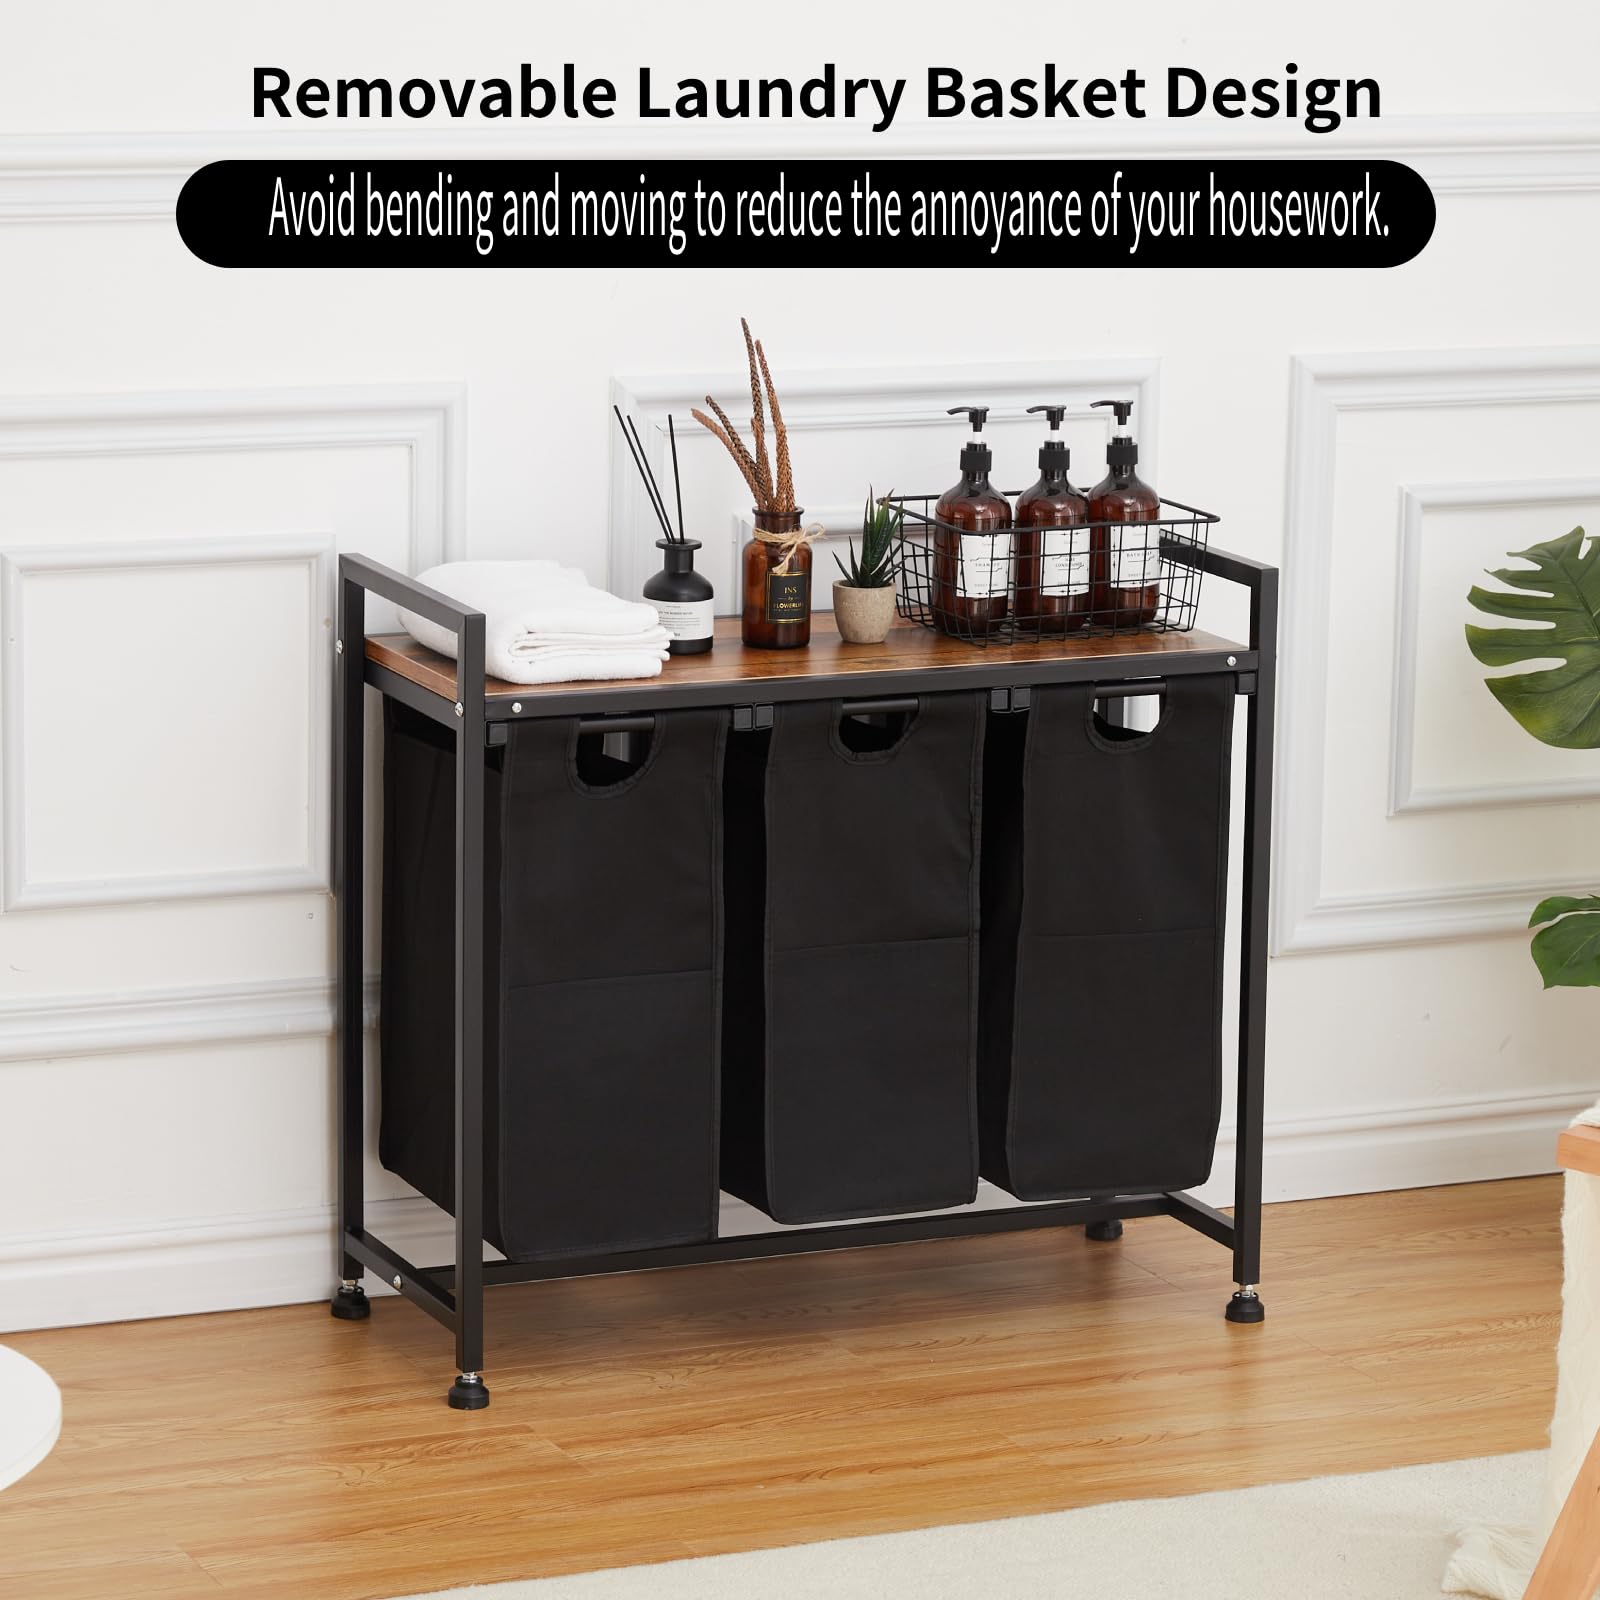 Laundry Hamper, Laundry Bags & 2 Tier Adjustable Storage Shelf, Pull-Out and Removable Oxford Fabric Laundry Baskets, for Home/Hotel Black